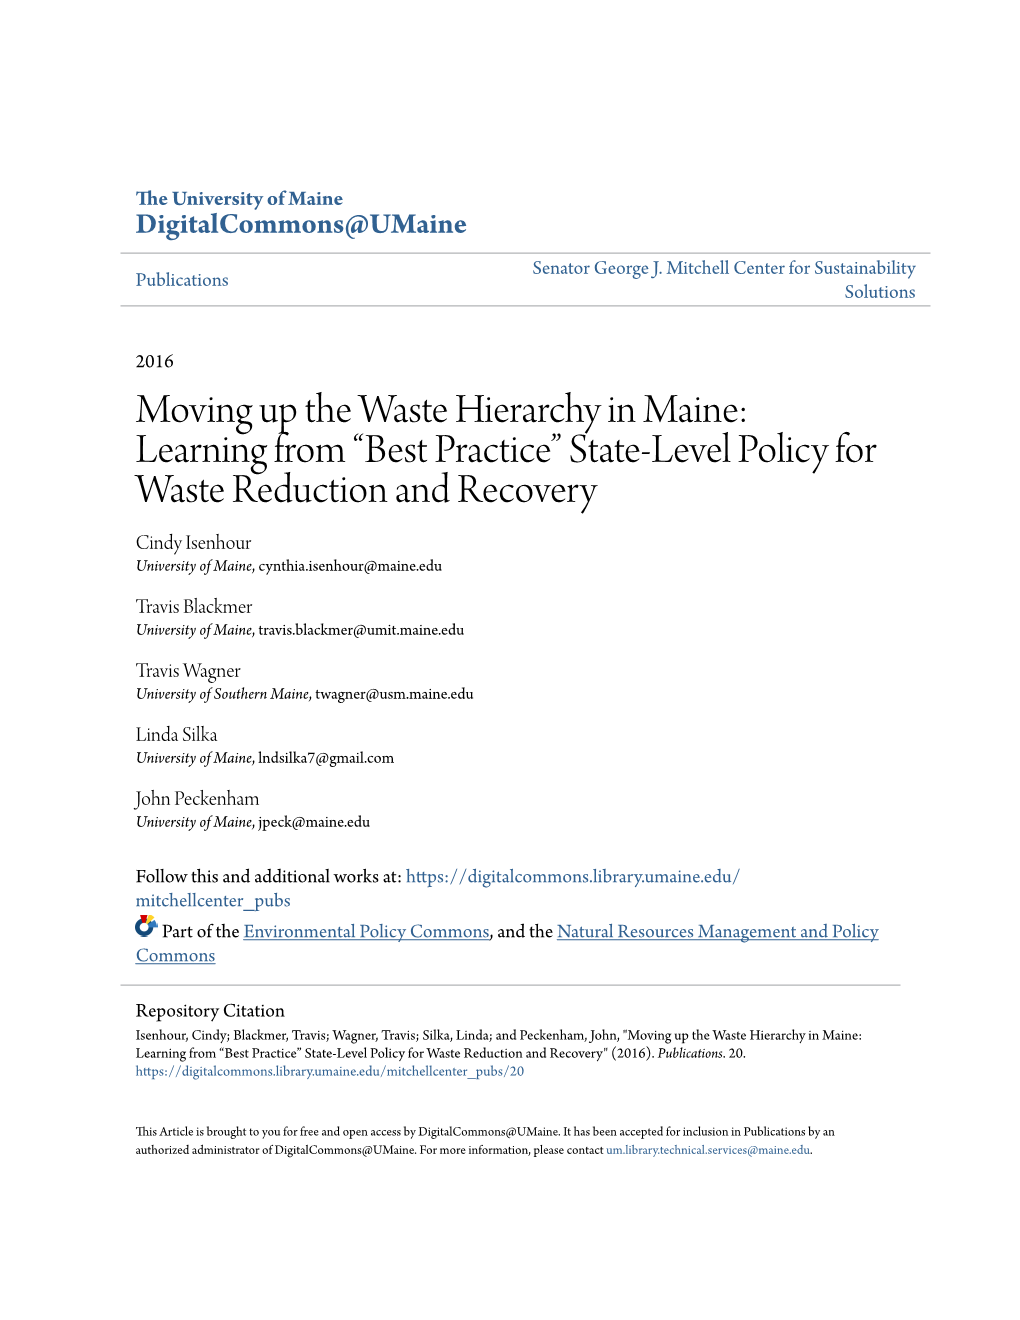 Moving up the Waste Hierarchy in Maine: Learning from “Best Practice” State-Level Policy for Waste Reduction and Recovery